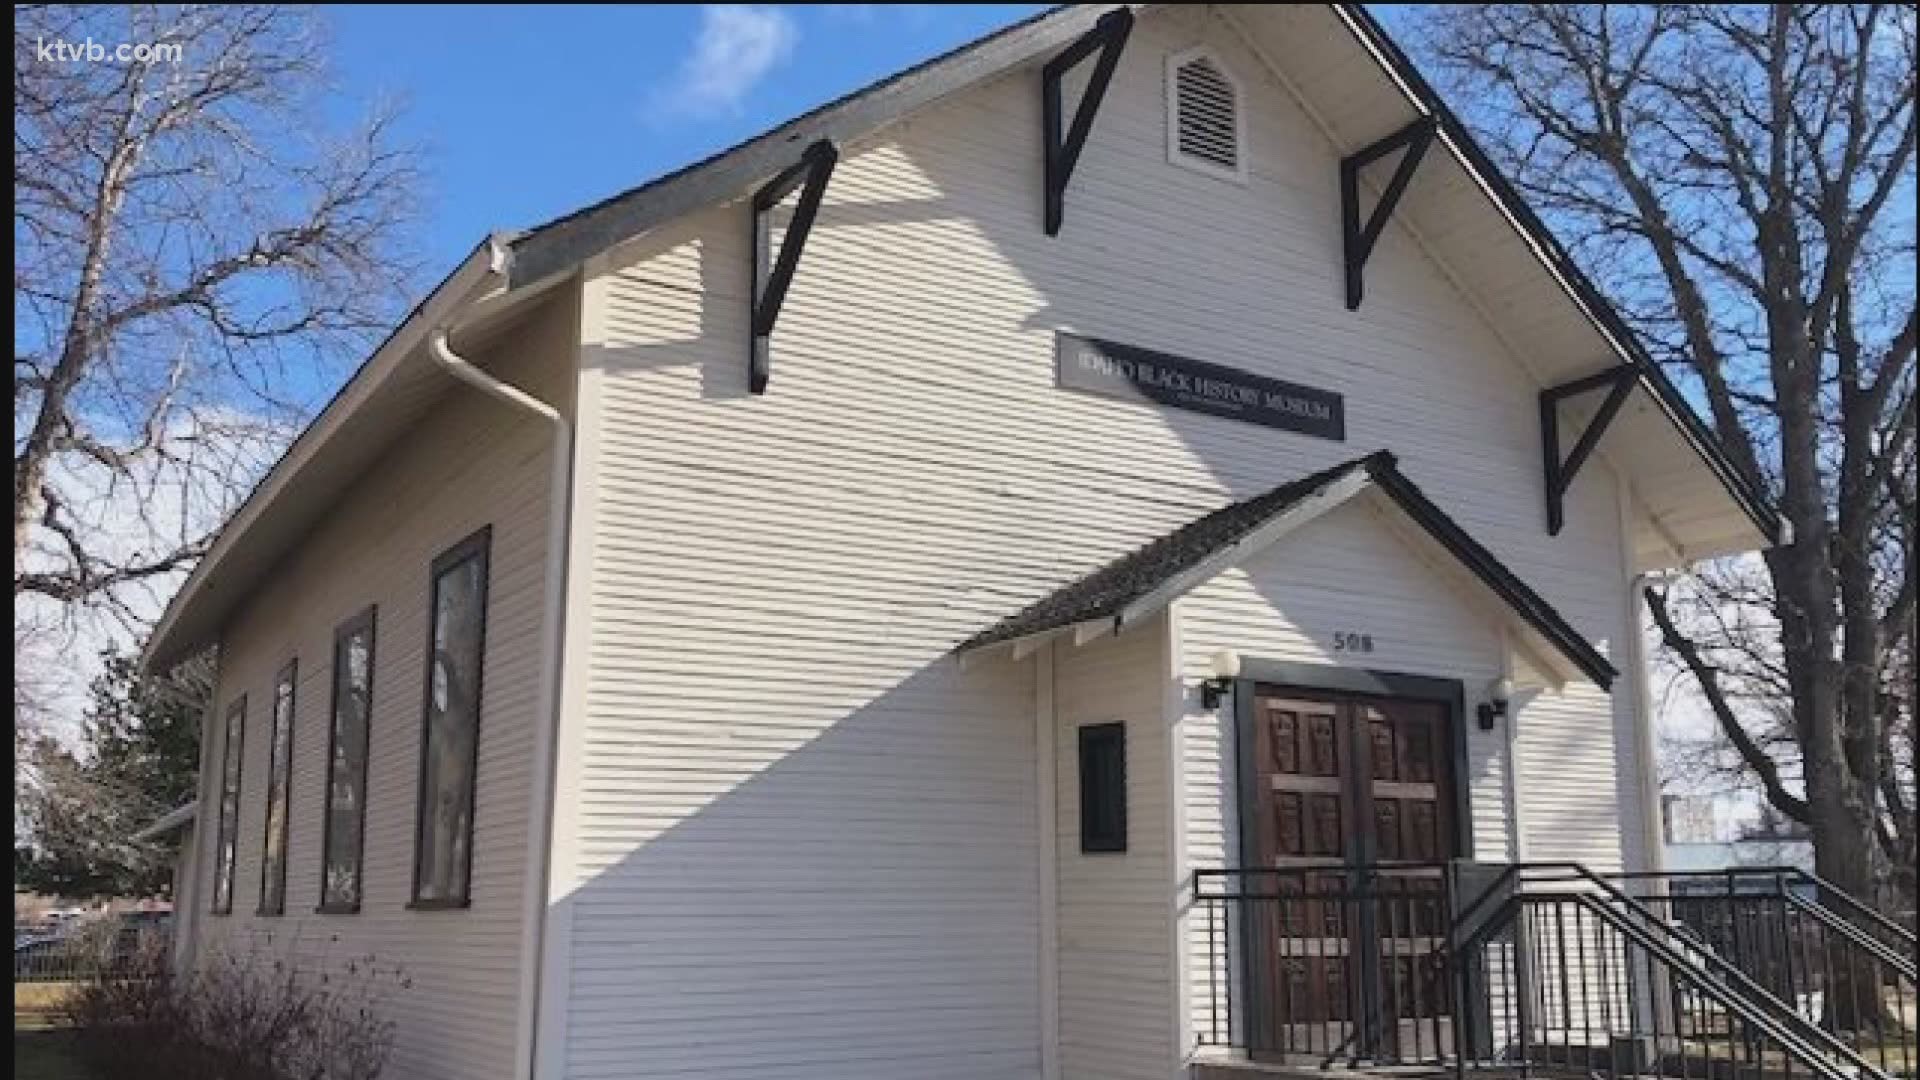 The building that was Idaho's first Black church is now the home of the Idaho Black History Museum in Julia Davis Park.